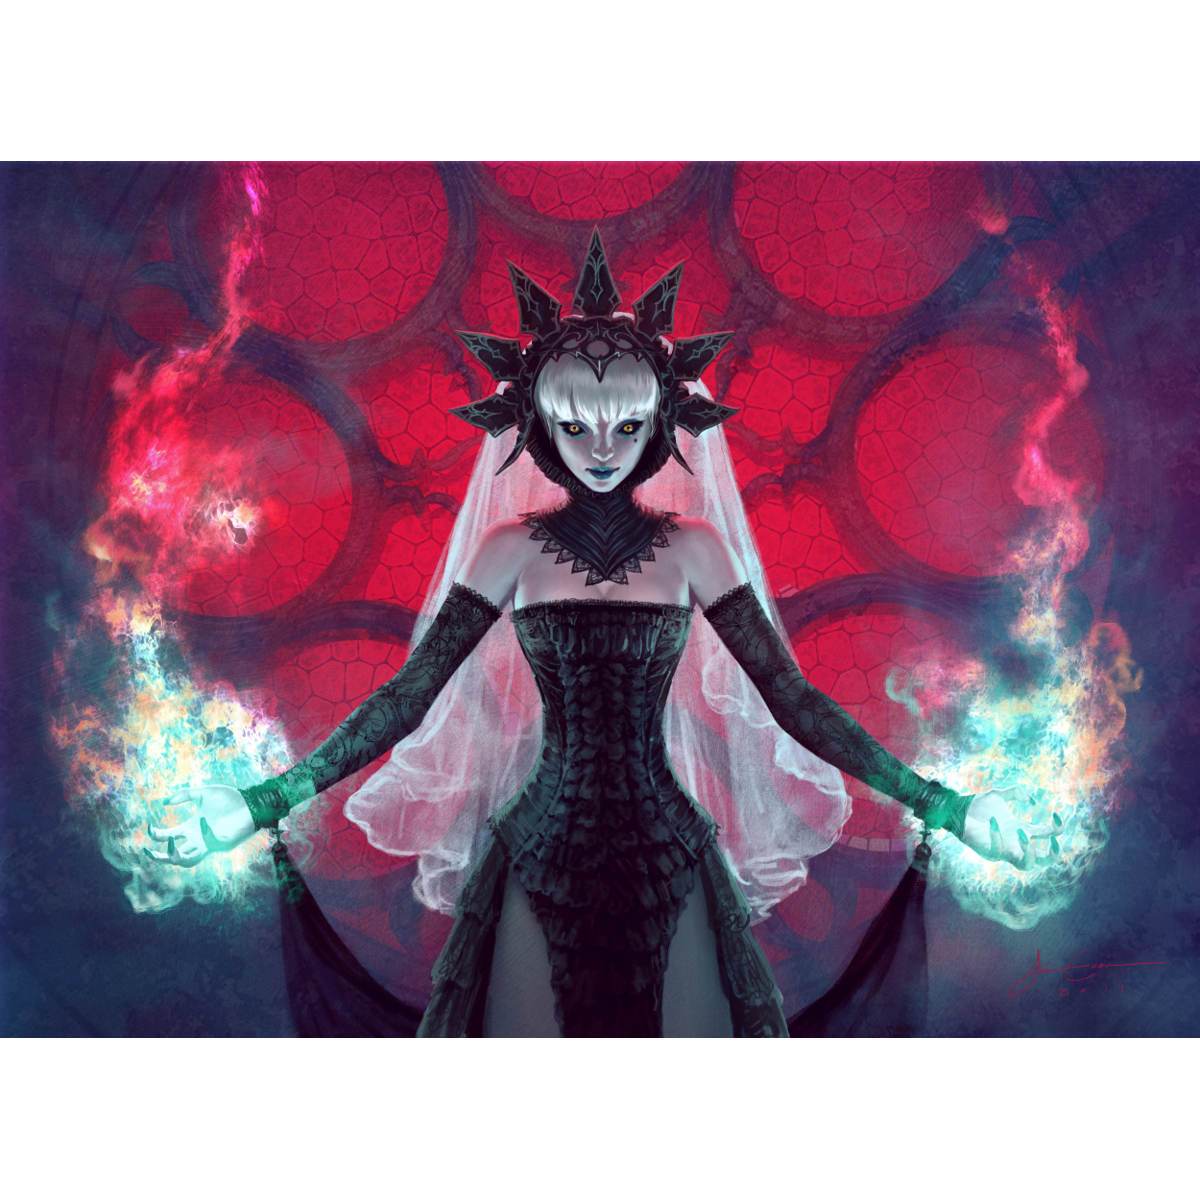 Fires of Undeath Print - Print - Original Magic Art - Accessories for Magic the Gathering and other card games